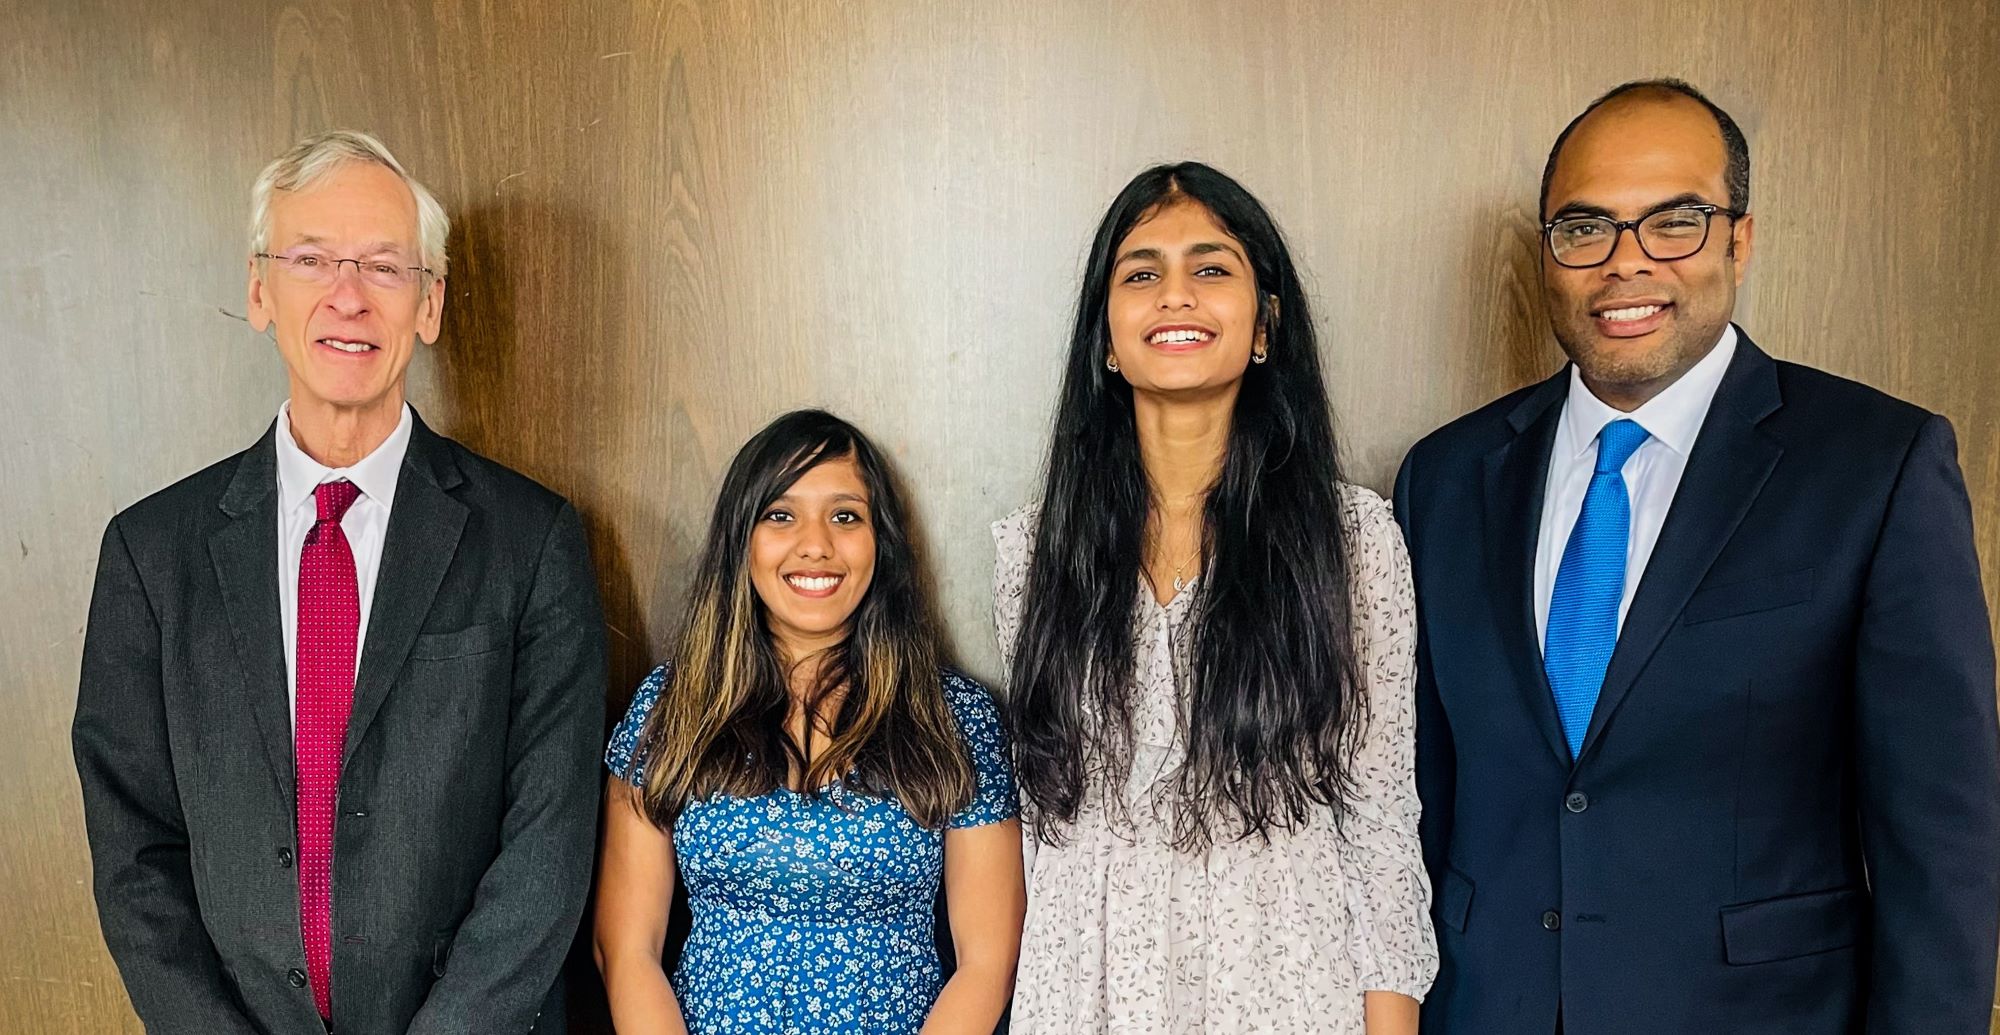 Deepti Saravanan and Jahnavi Swetha Pothineni (Center Left and Center Right) pose with Courant Director Russel Caflisch (Left) and Professor Anasse Bari (Right) at the Prizes & Fellowship Ceremony.